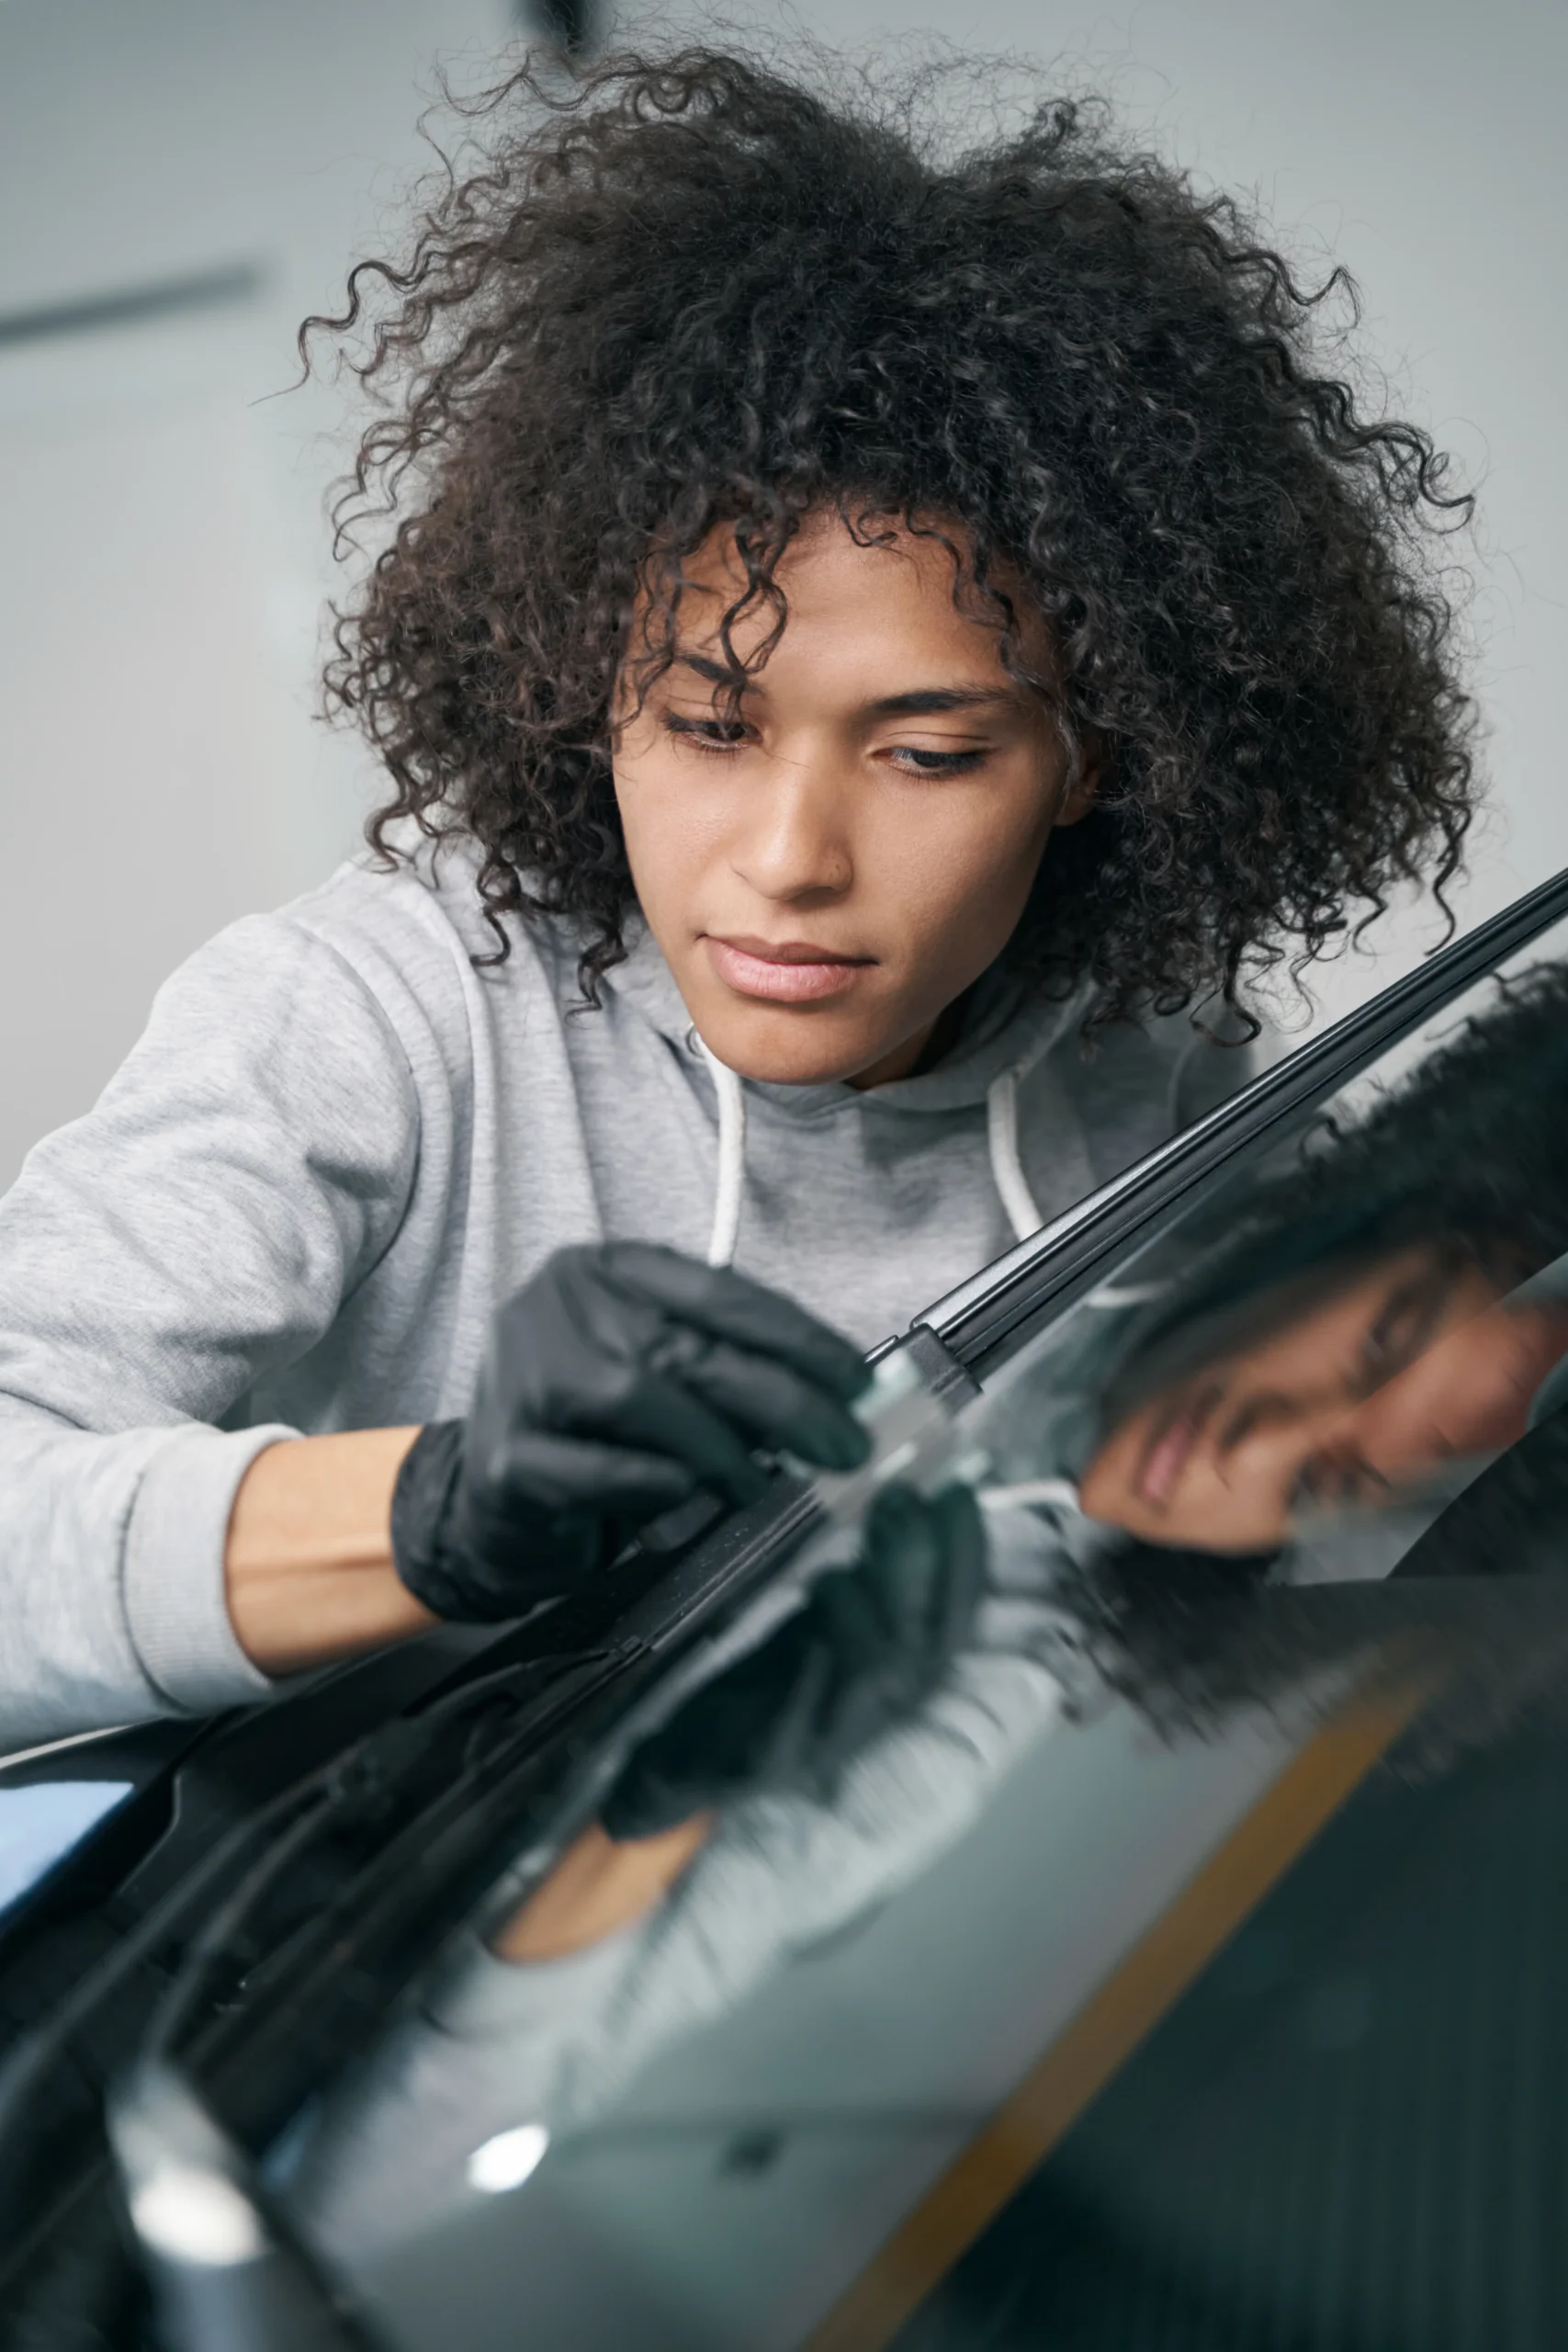 worker-removing-debris-from-windscreen-surface